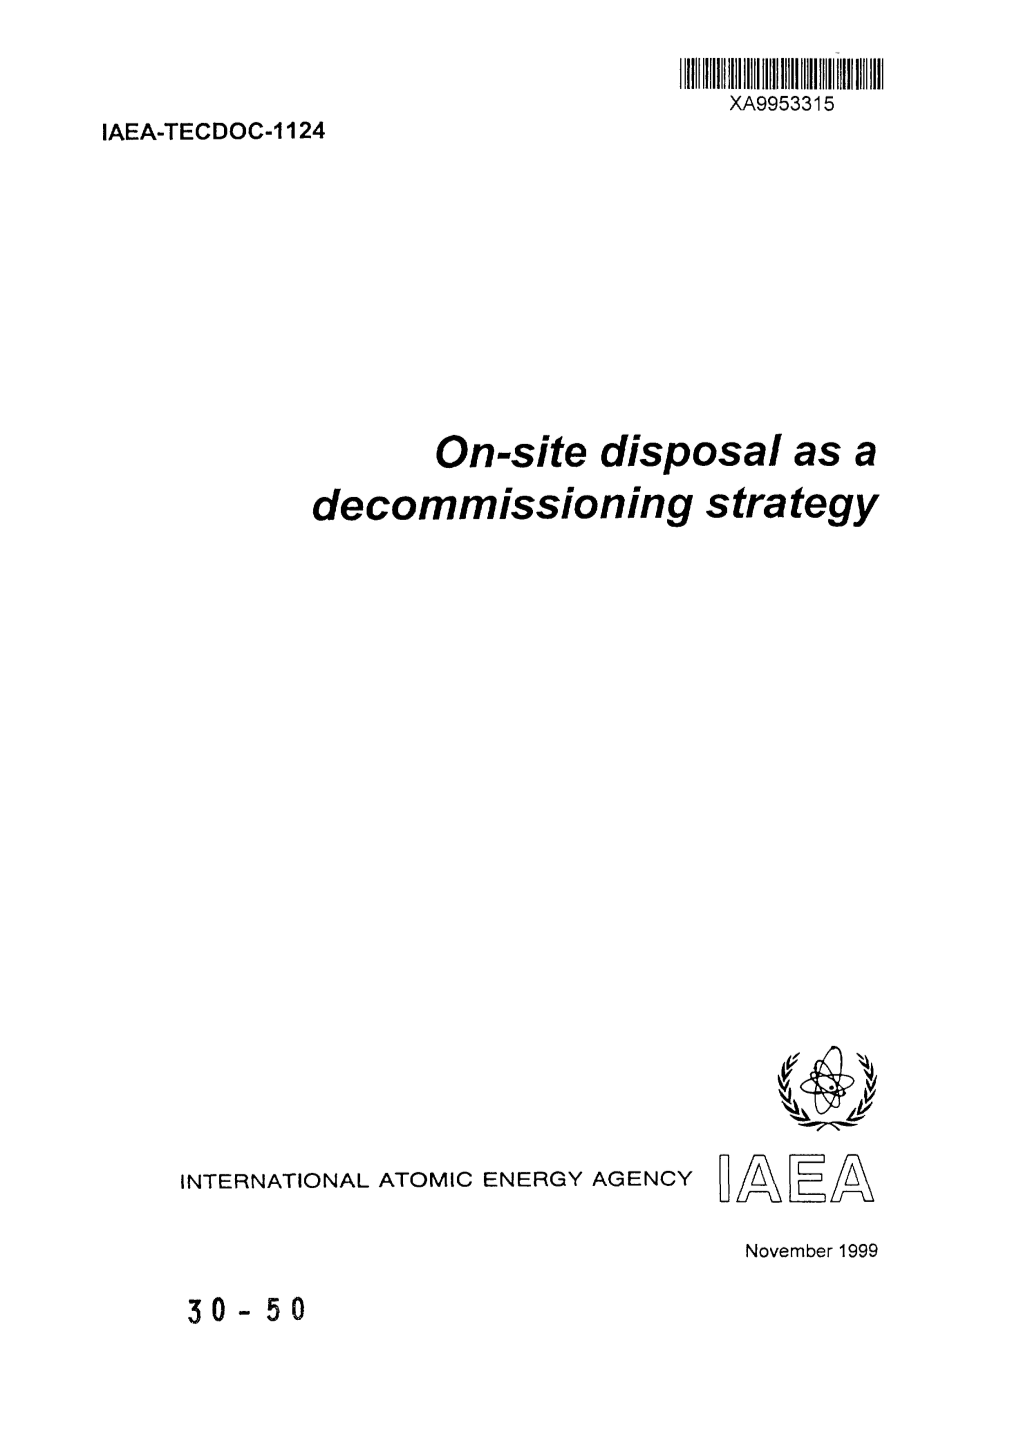 On-Site Disposal As a Decommissioning Strategy